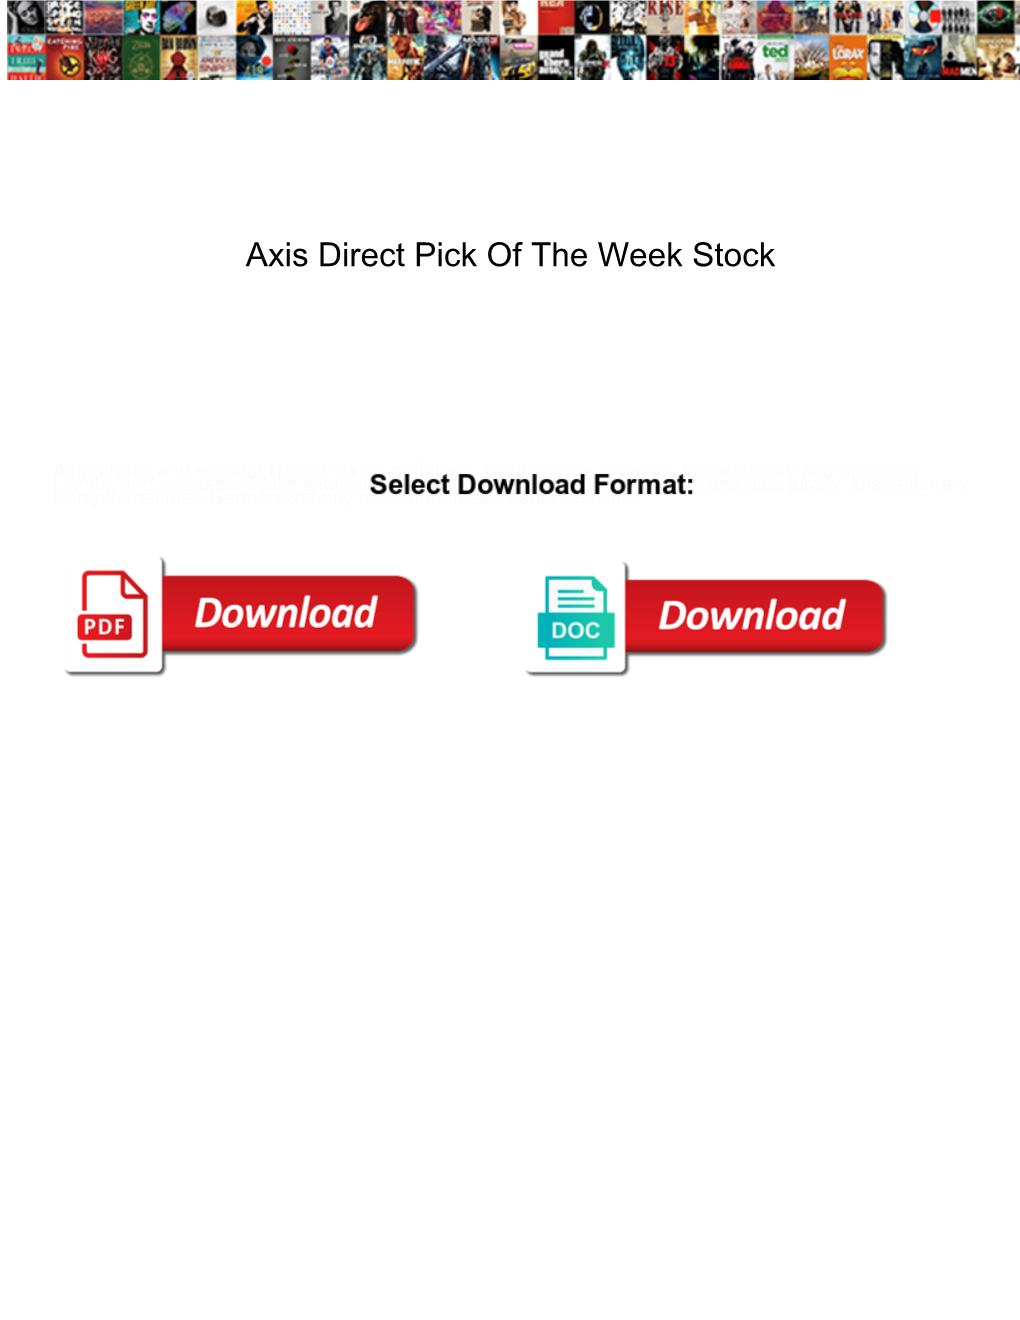 Axis Direct Pick of the Week Stock